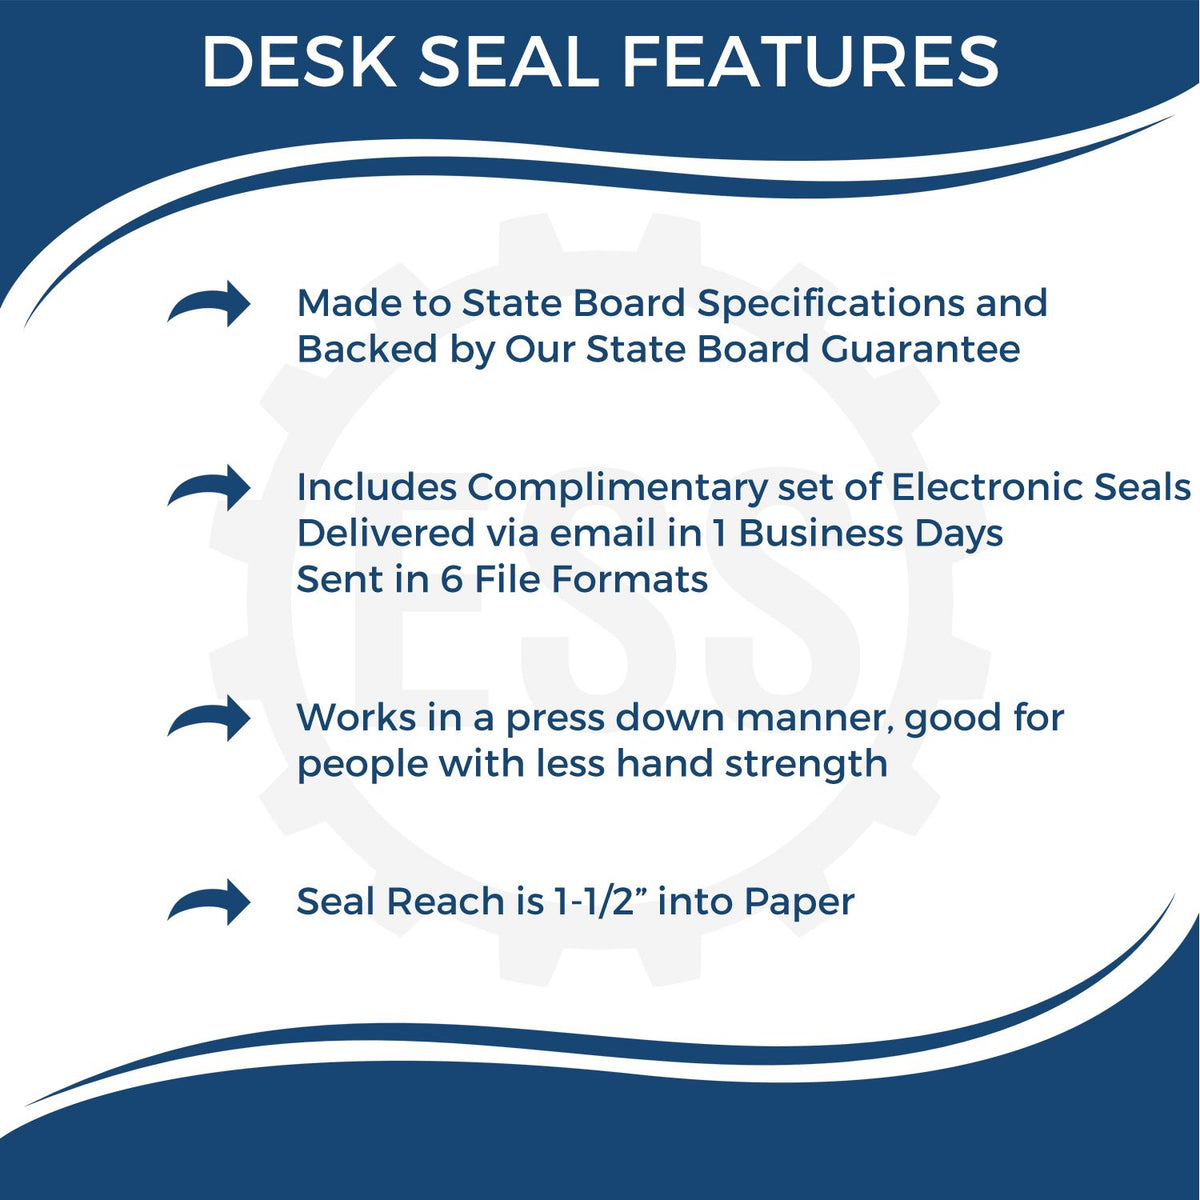 A picture of an infographic highlighting the selling points for the Nebraska Engineer Desk Seal